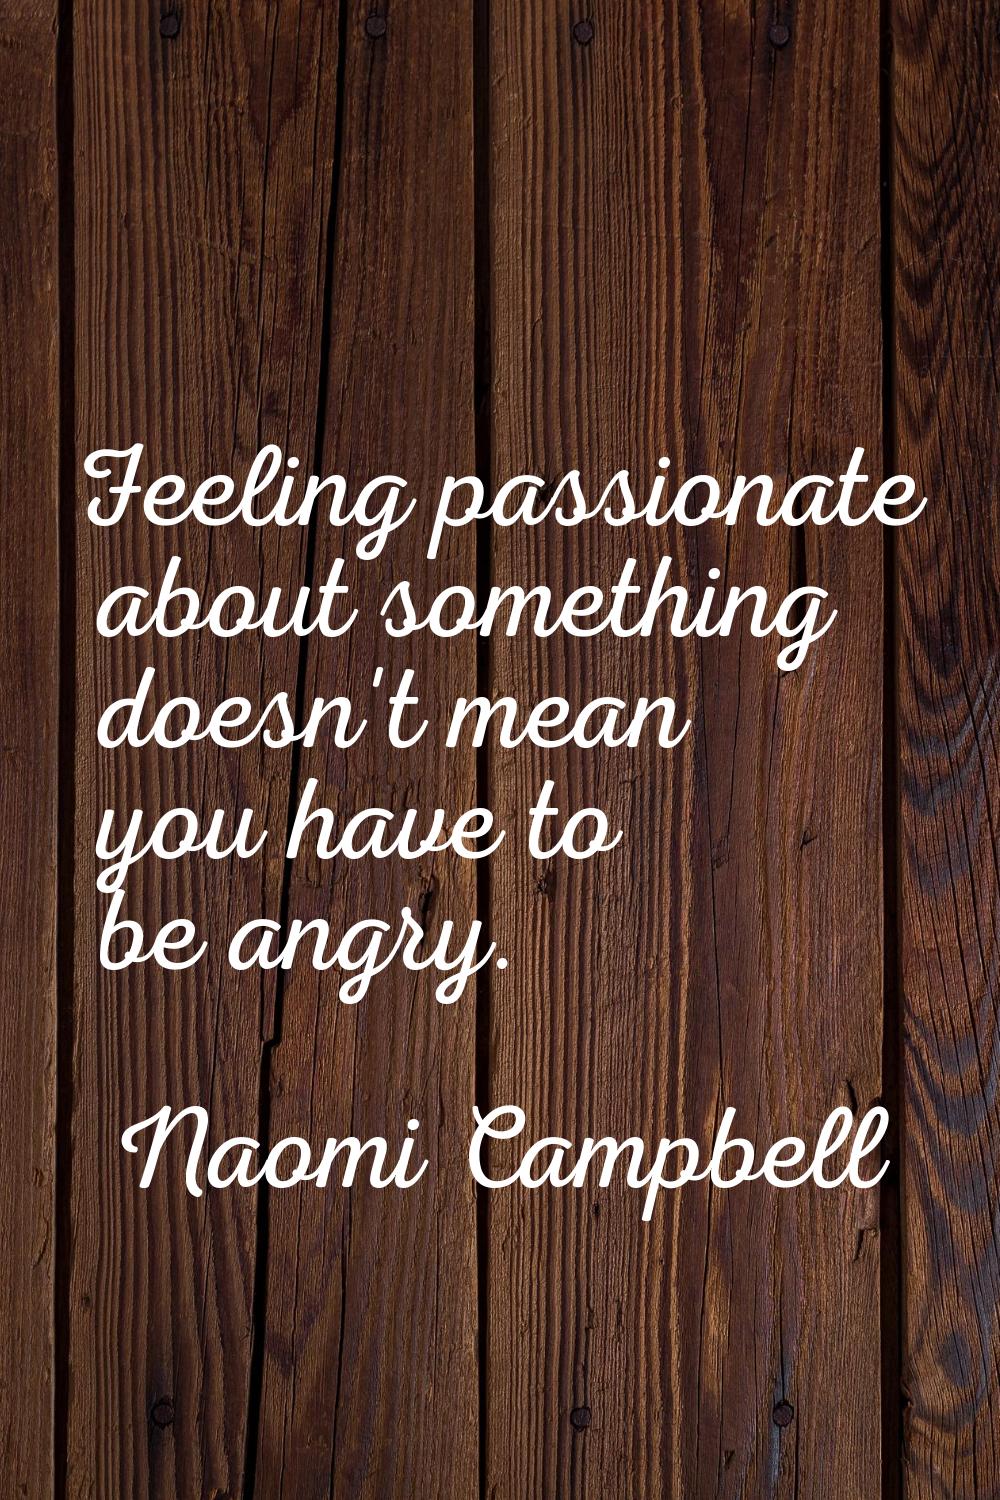 Feeling passionate about something doesn't mean you have to be angry.